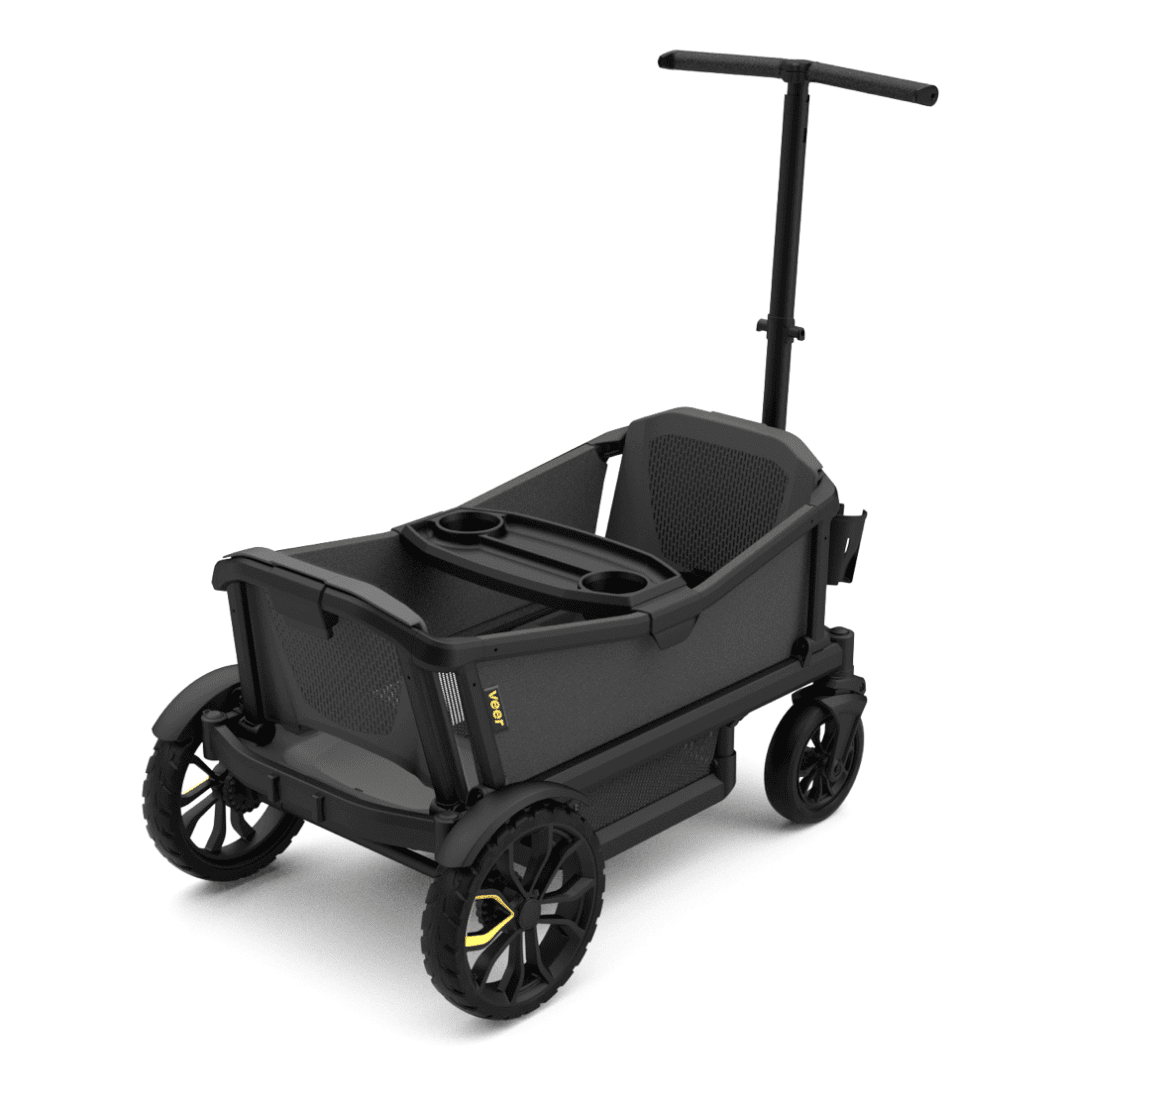 veer stroller wagon as it comes in the box with a snack tray and cup holders